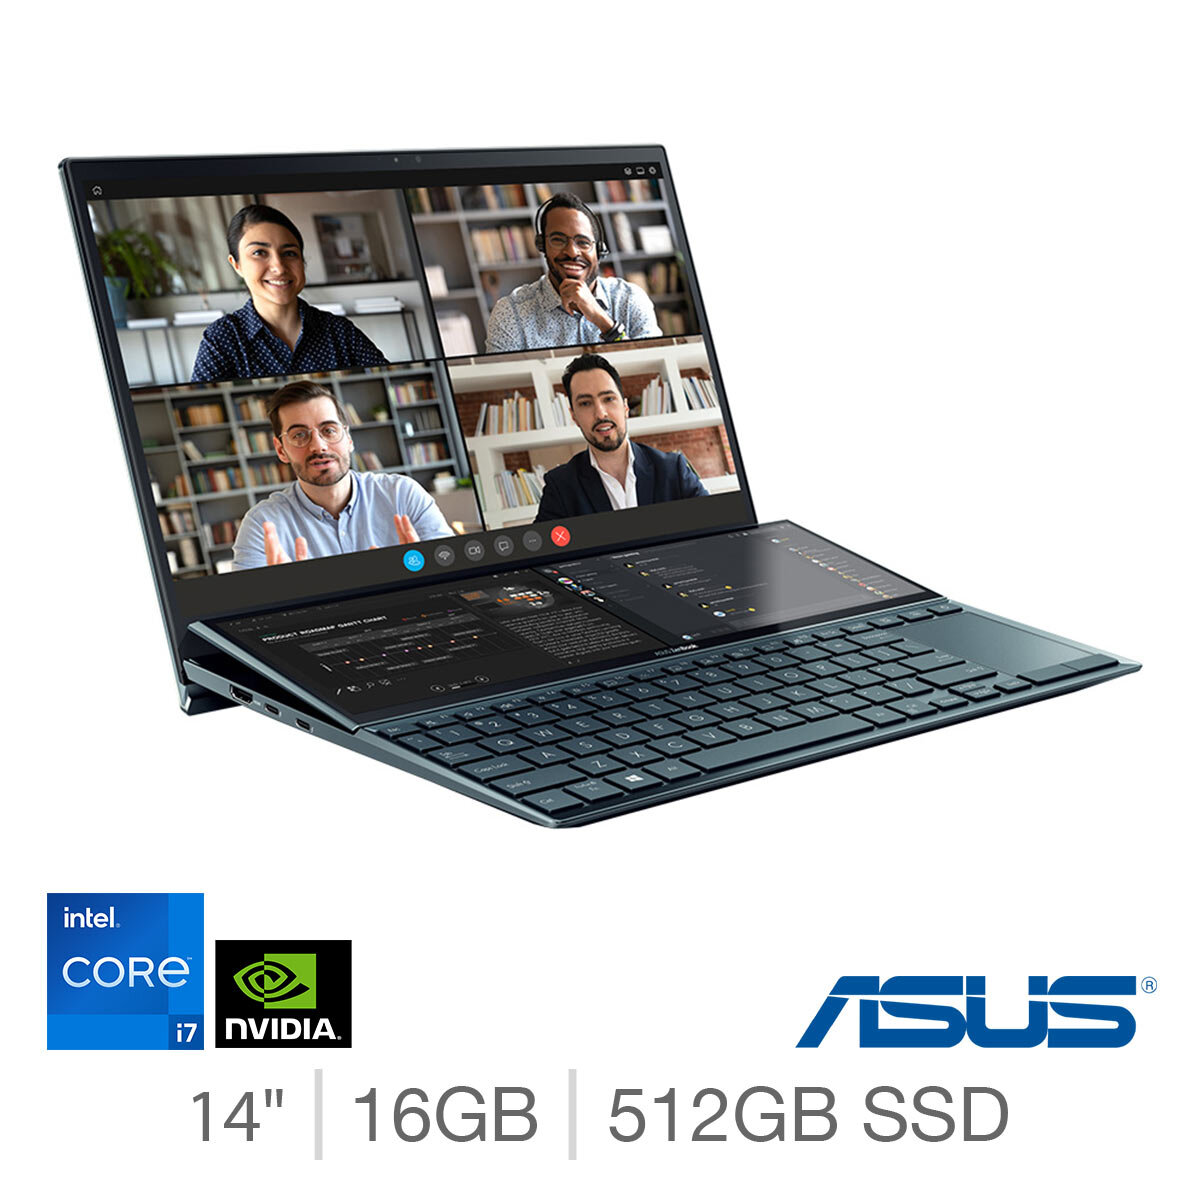 ASUS ZenBook Duo 14 UX482 - Specs, Tests, and Prices